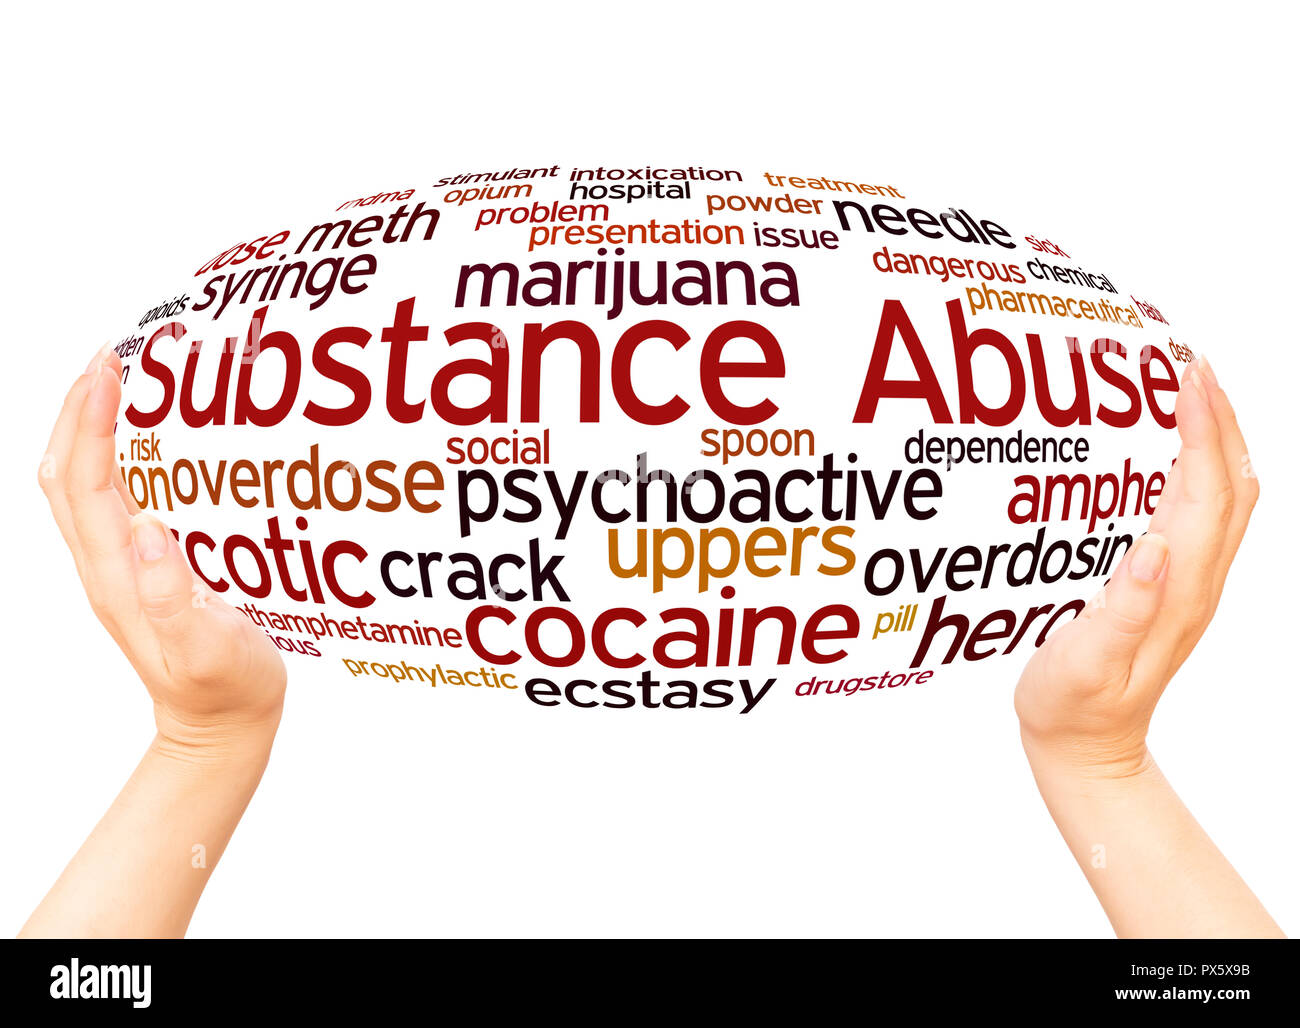 Substance Abuse word cloud hand sphere concept on white background. Stock Photo